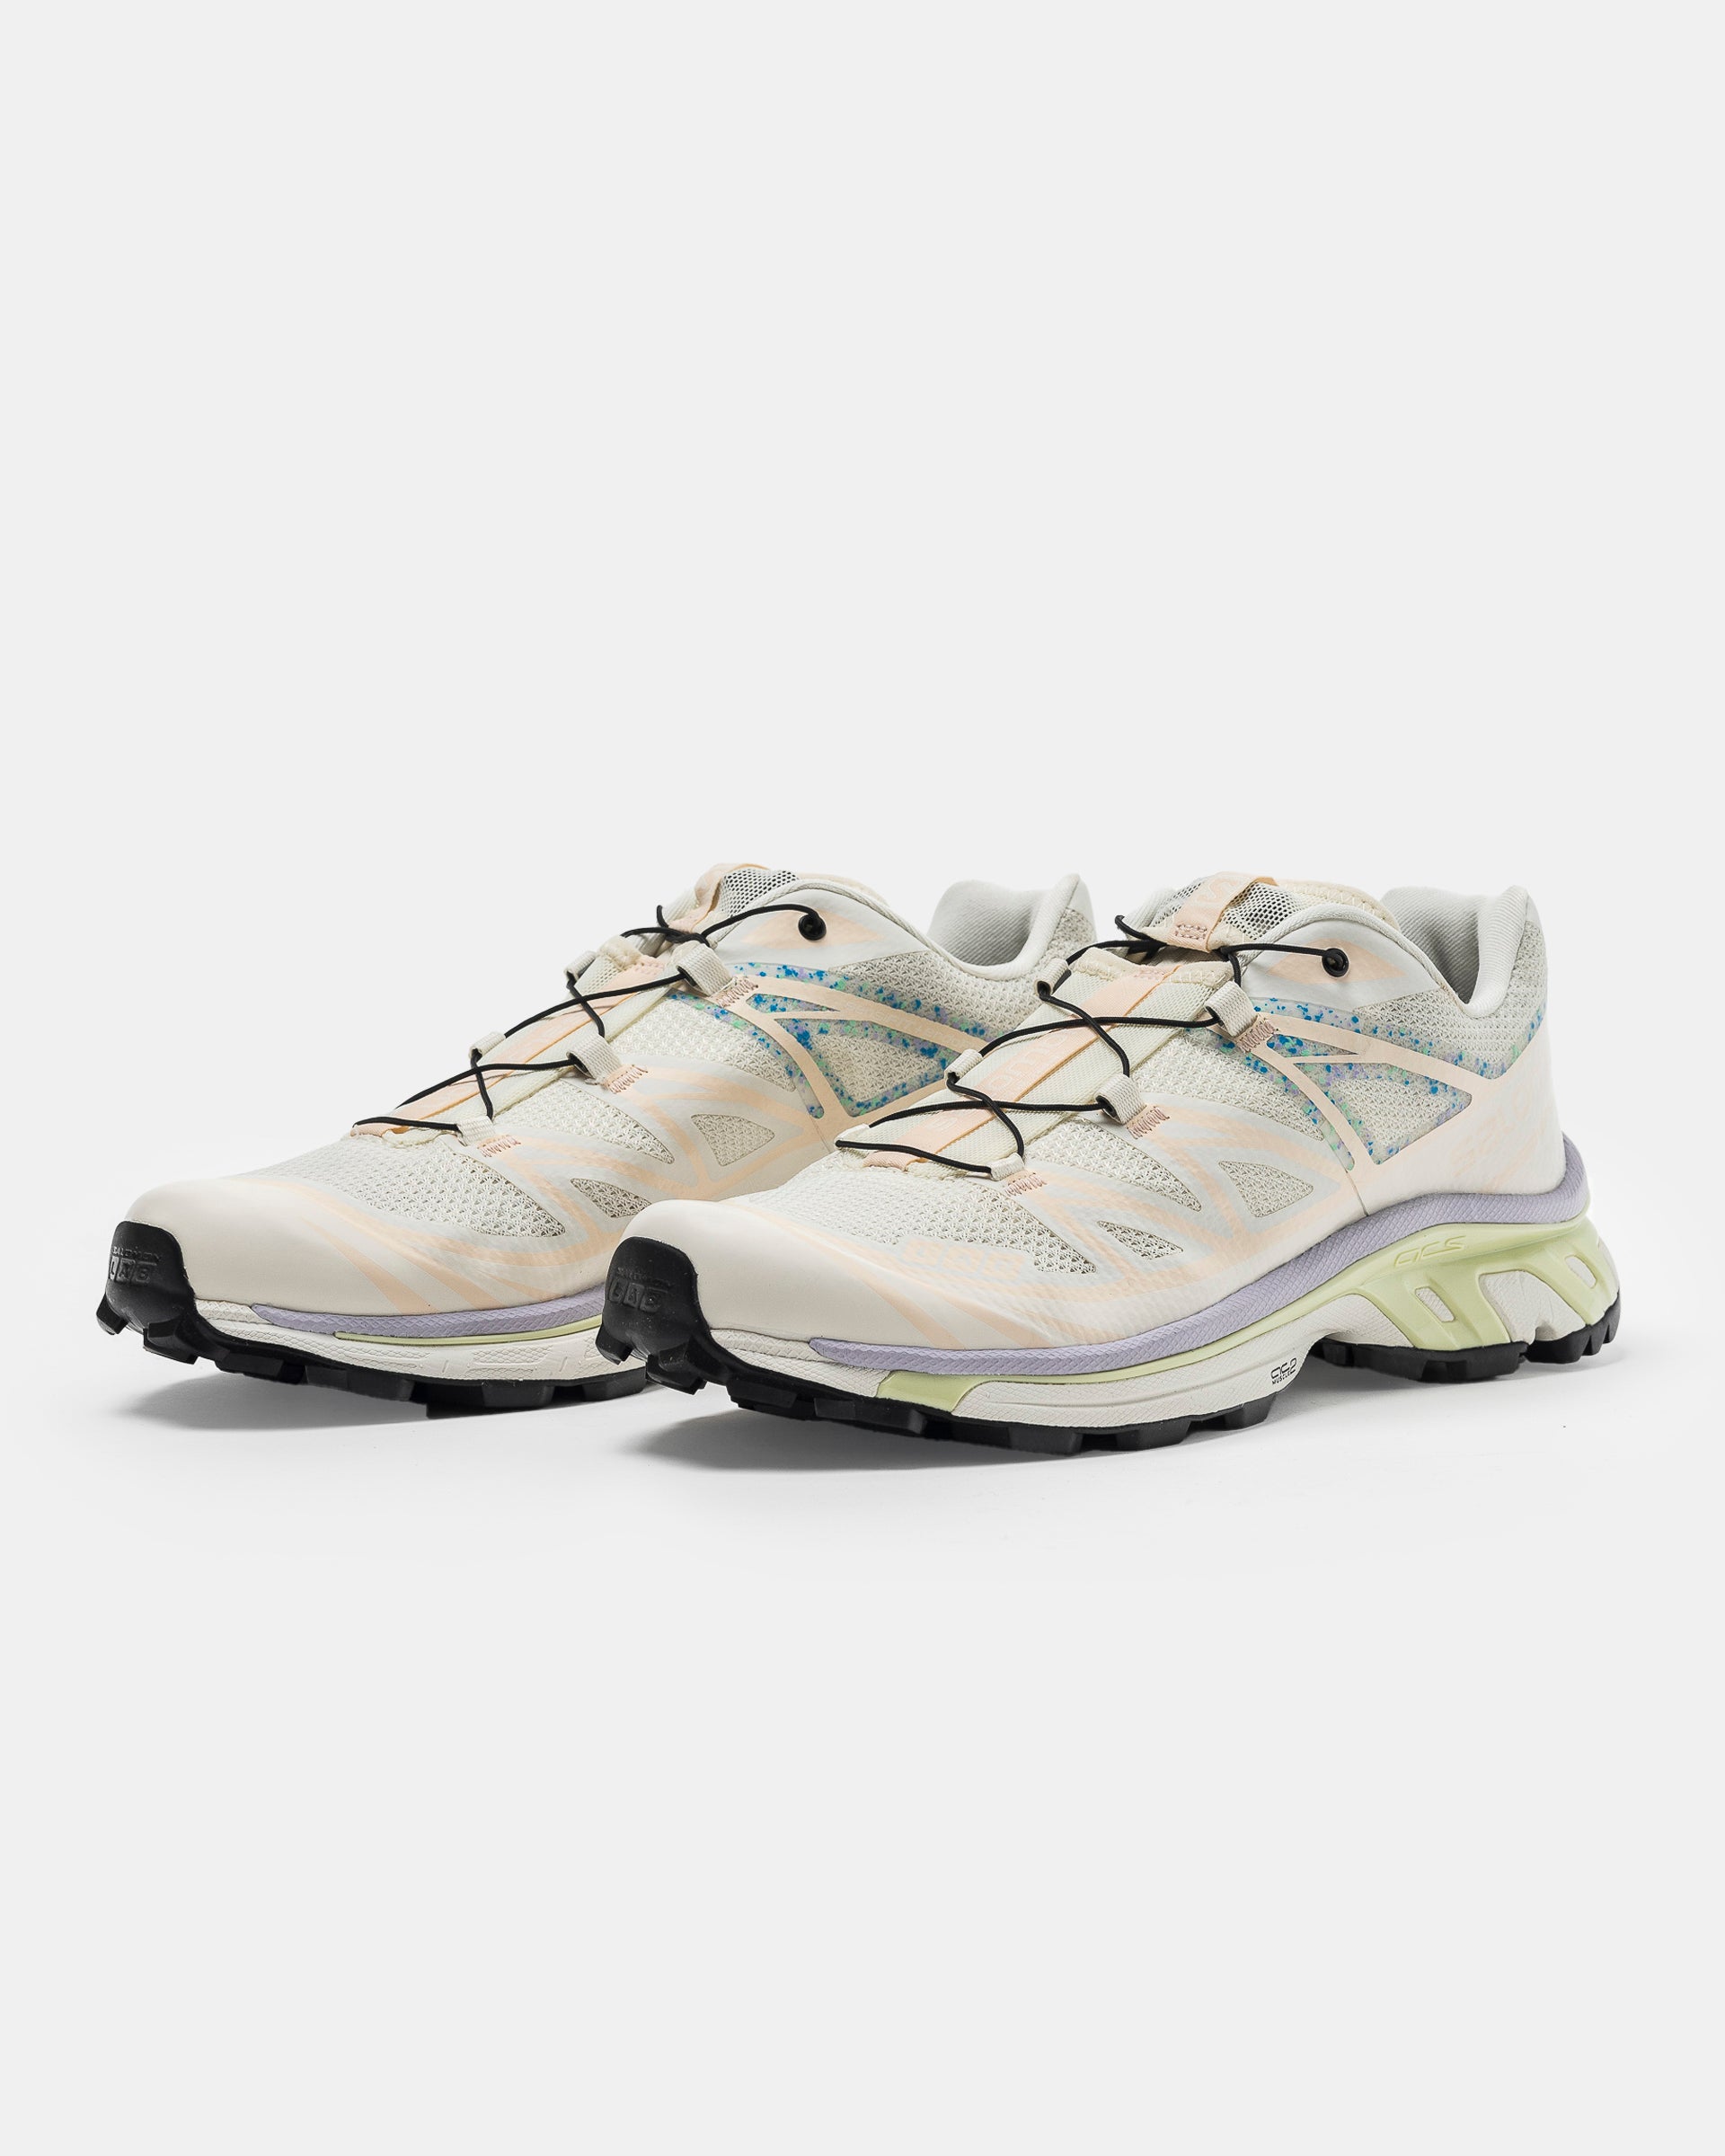 Salomon XT-6 Mindful in Vanilla, Cloud Pink, and Orchid Petal on the white background.